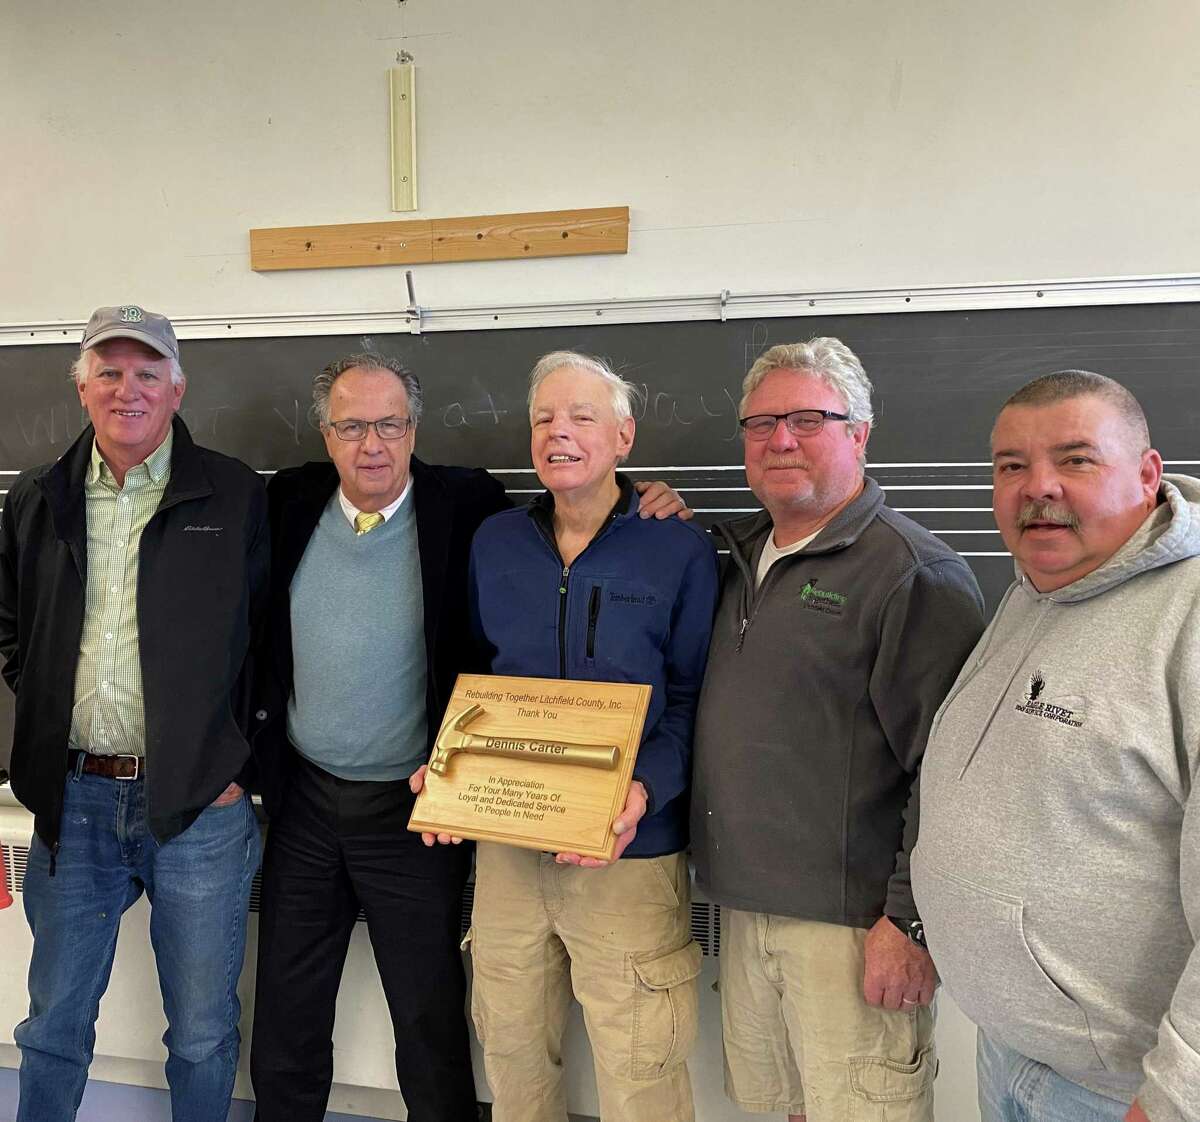 Board members, left to right, Bruce Adams, John Matta, Dennis Carter, Mike Bogues, and Tom Voytek, gathered to honor Carter's contribution to Rebuilding Together Litchfield County during the past decade.